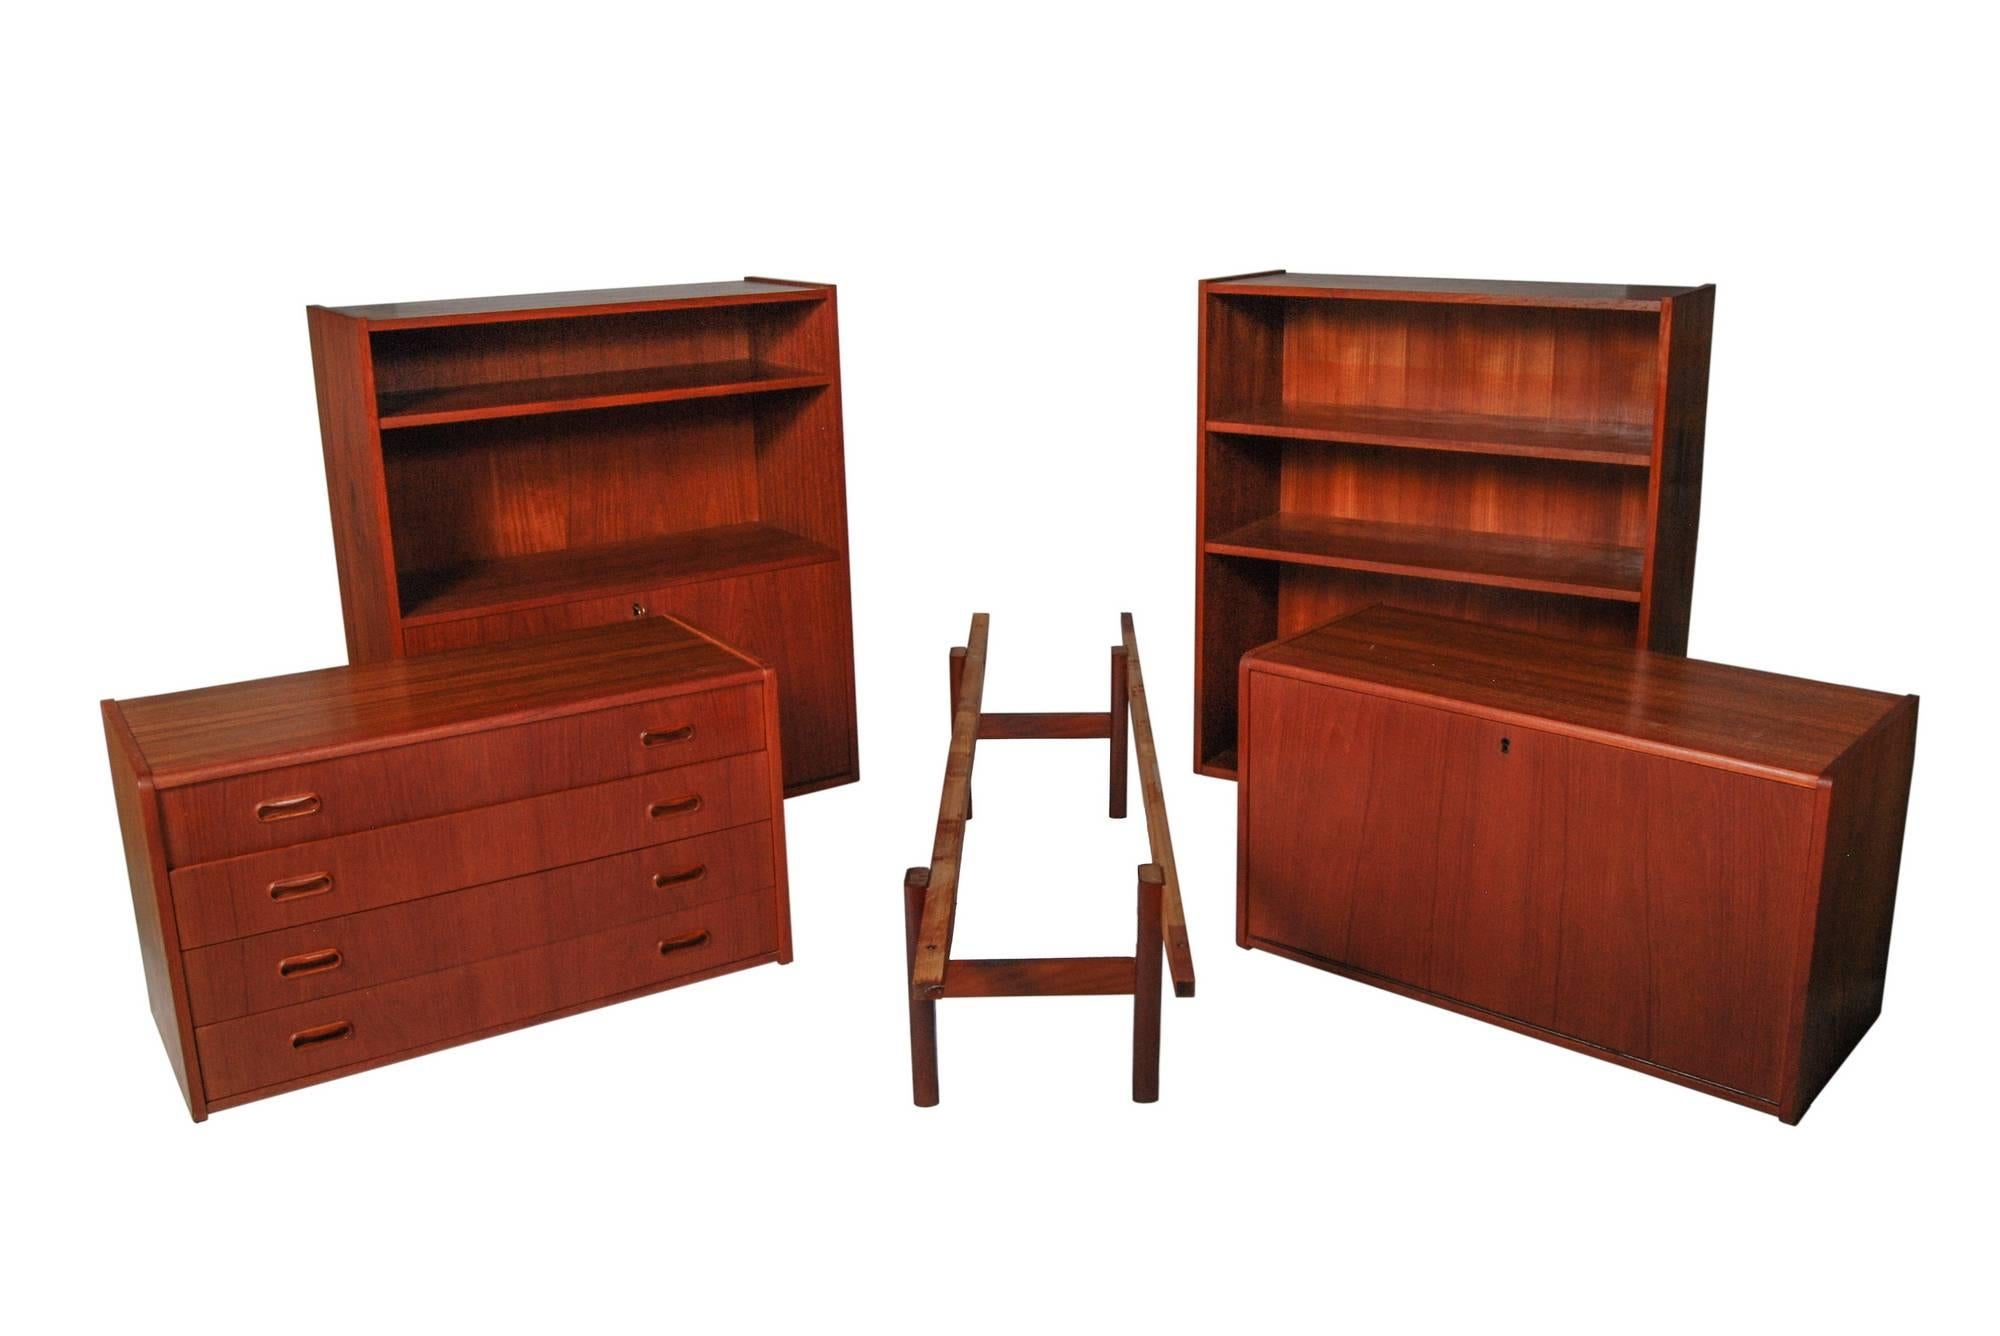 Vintage 1960s teak five section modular storage unit designed by Børge Mogensen, Denmark. The unit can be used in multiple different ways and has adjustable shelving, drawers with sculpted handles and a pull down desk or writing area. Unmarked.